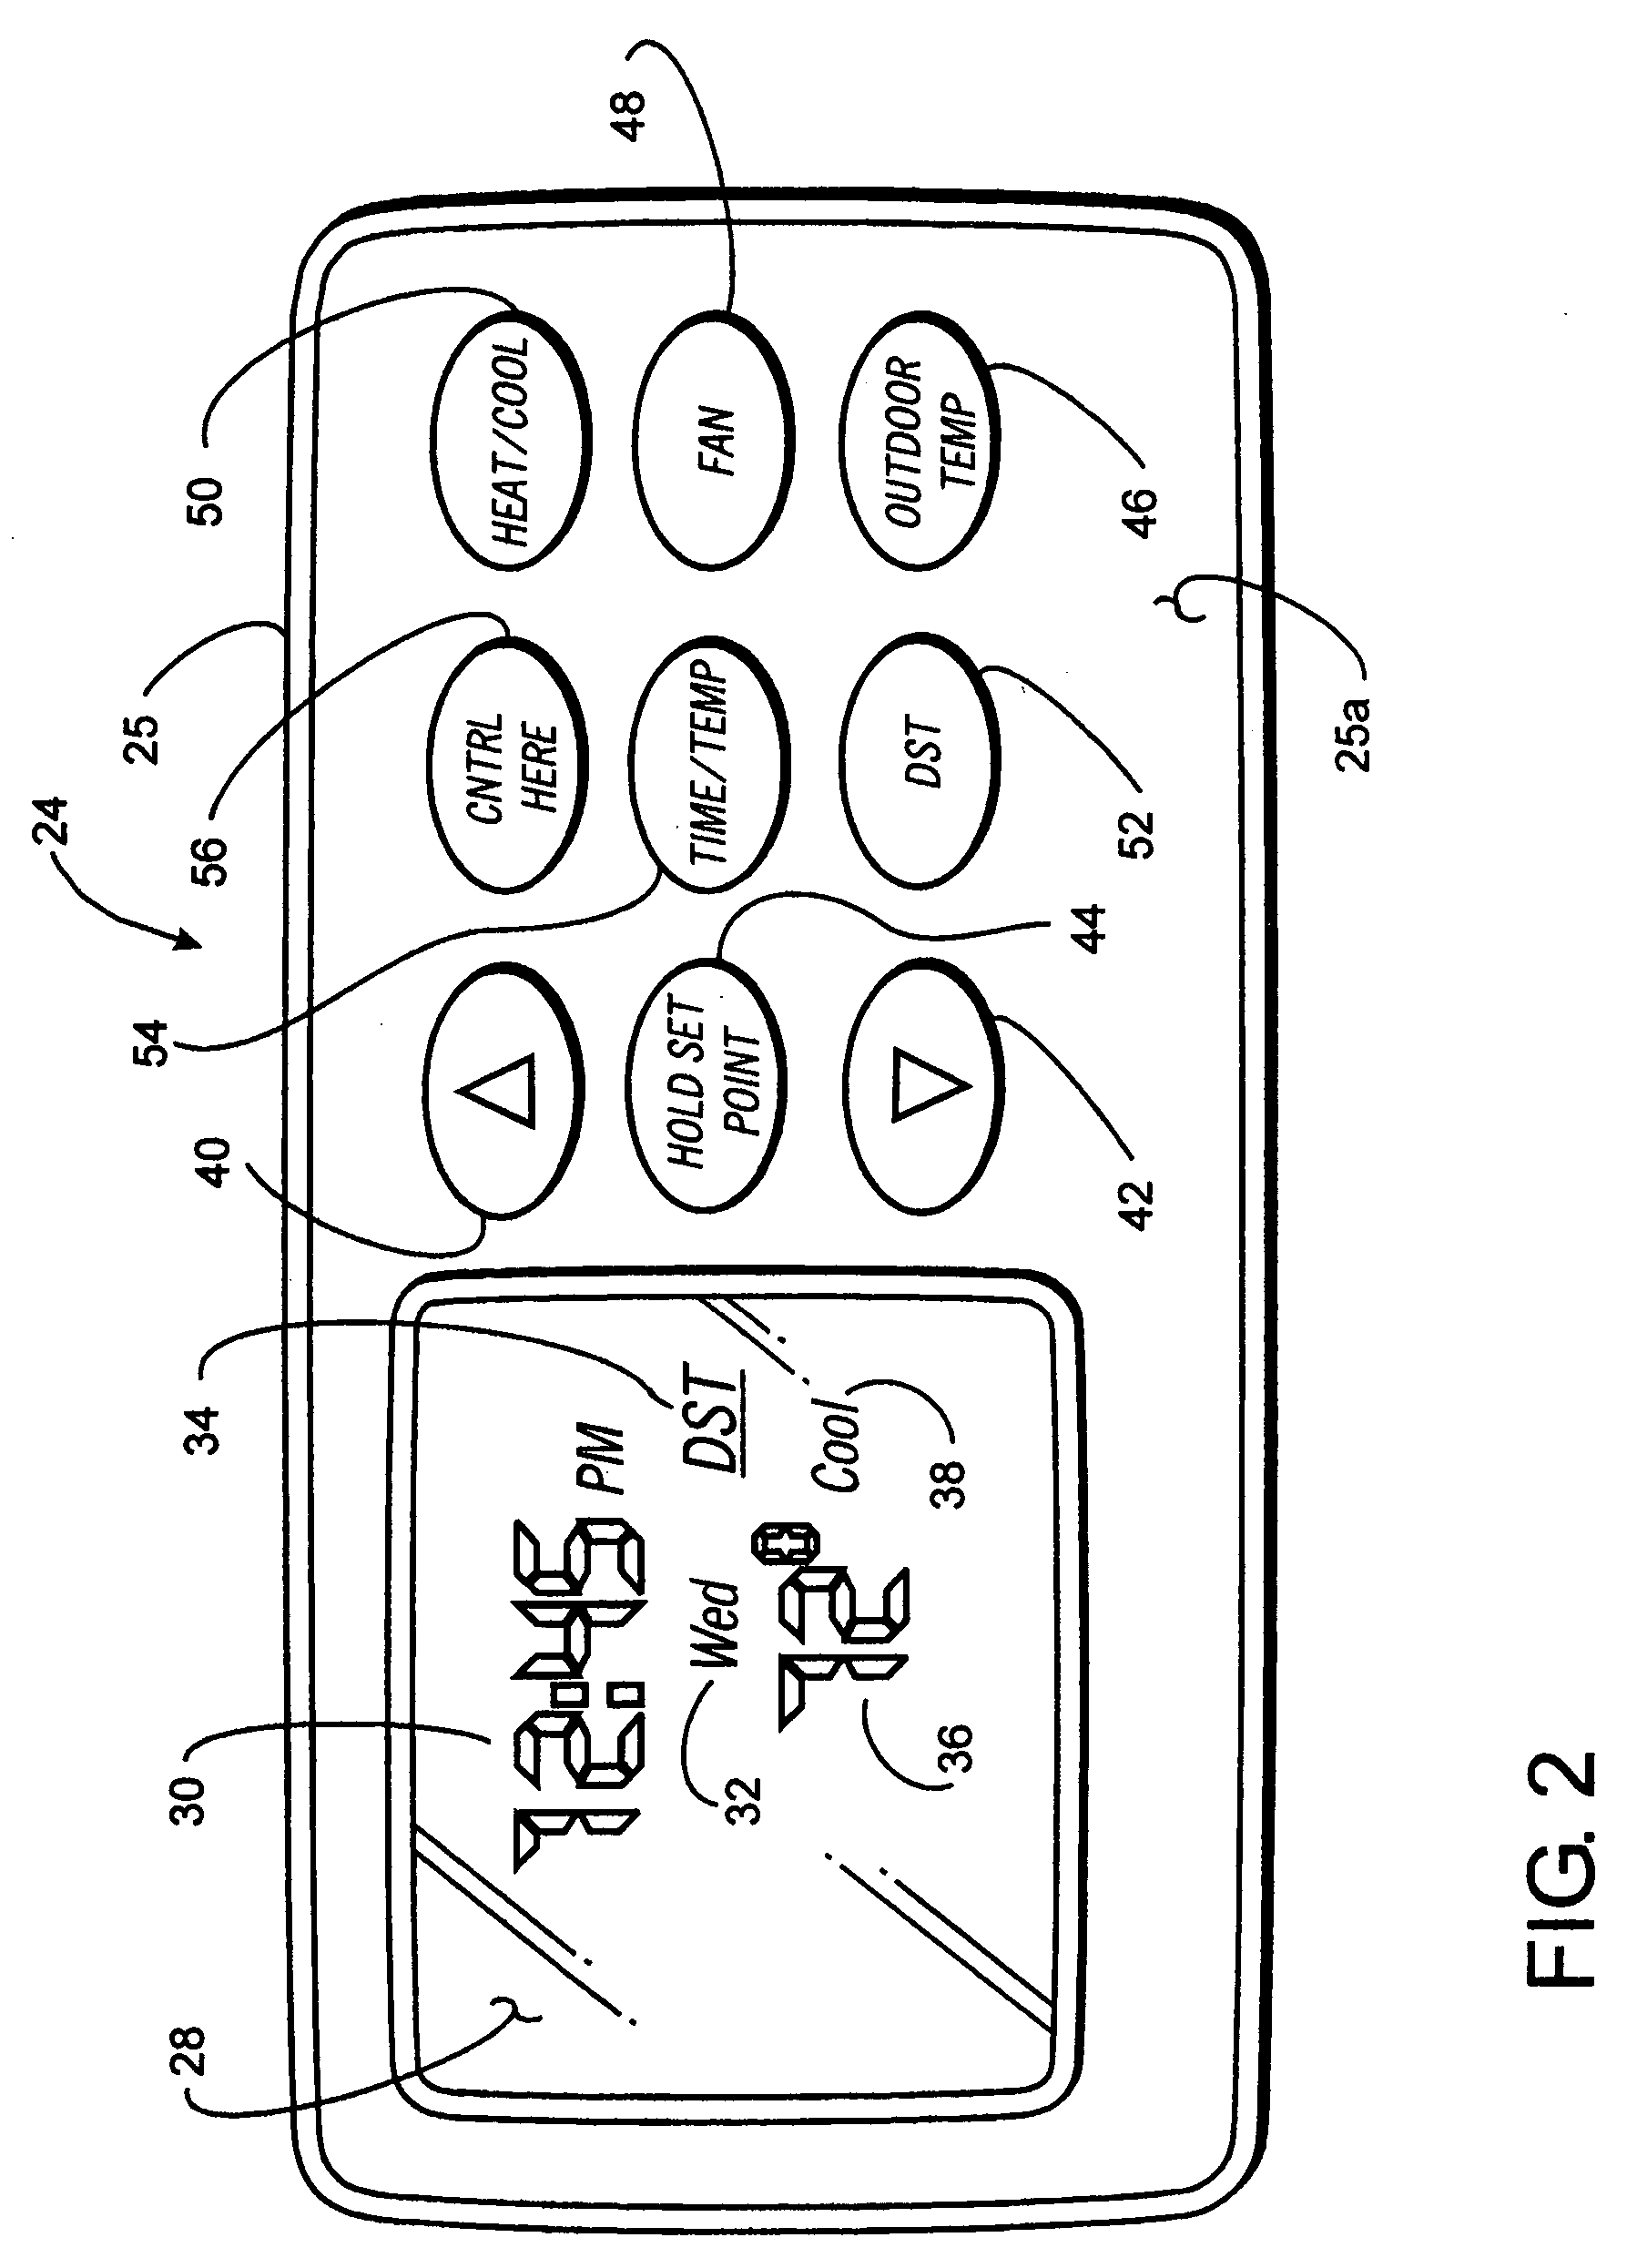 Multiple thermostats for air conditioning system with time setting feature